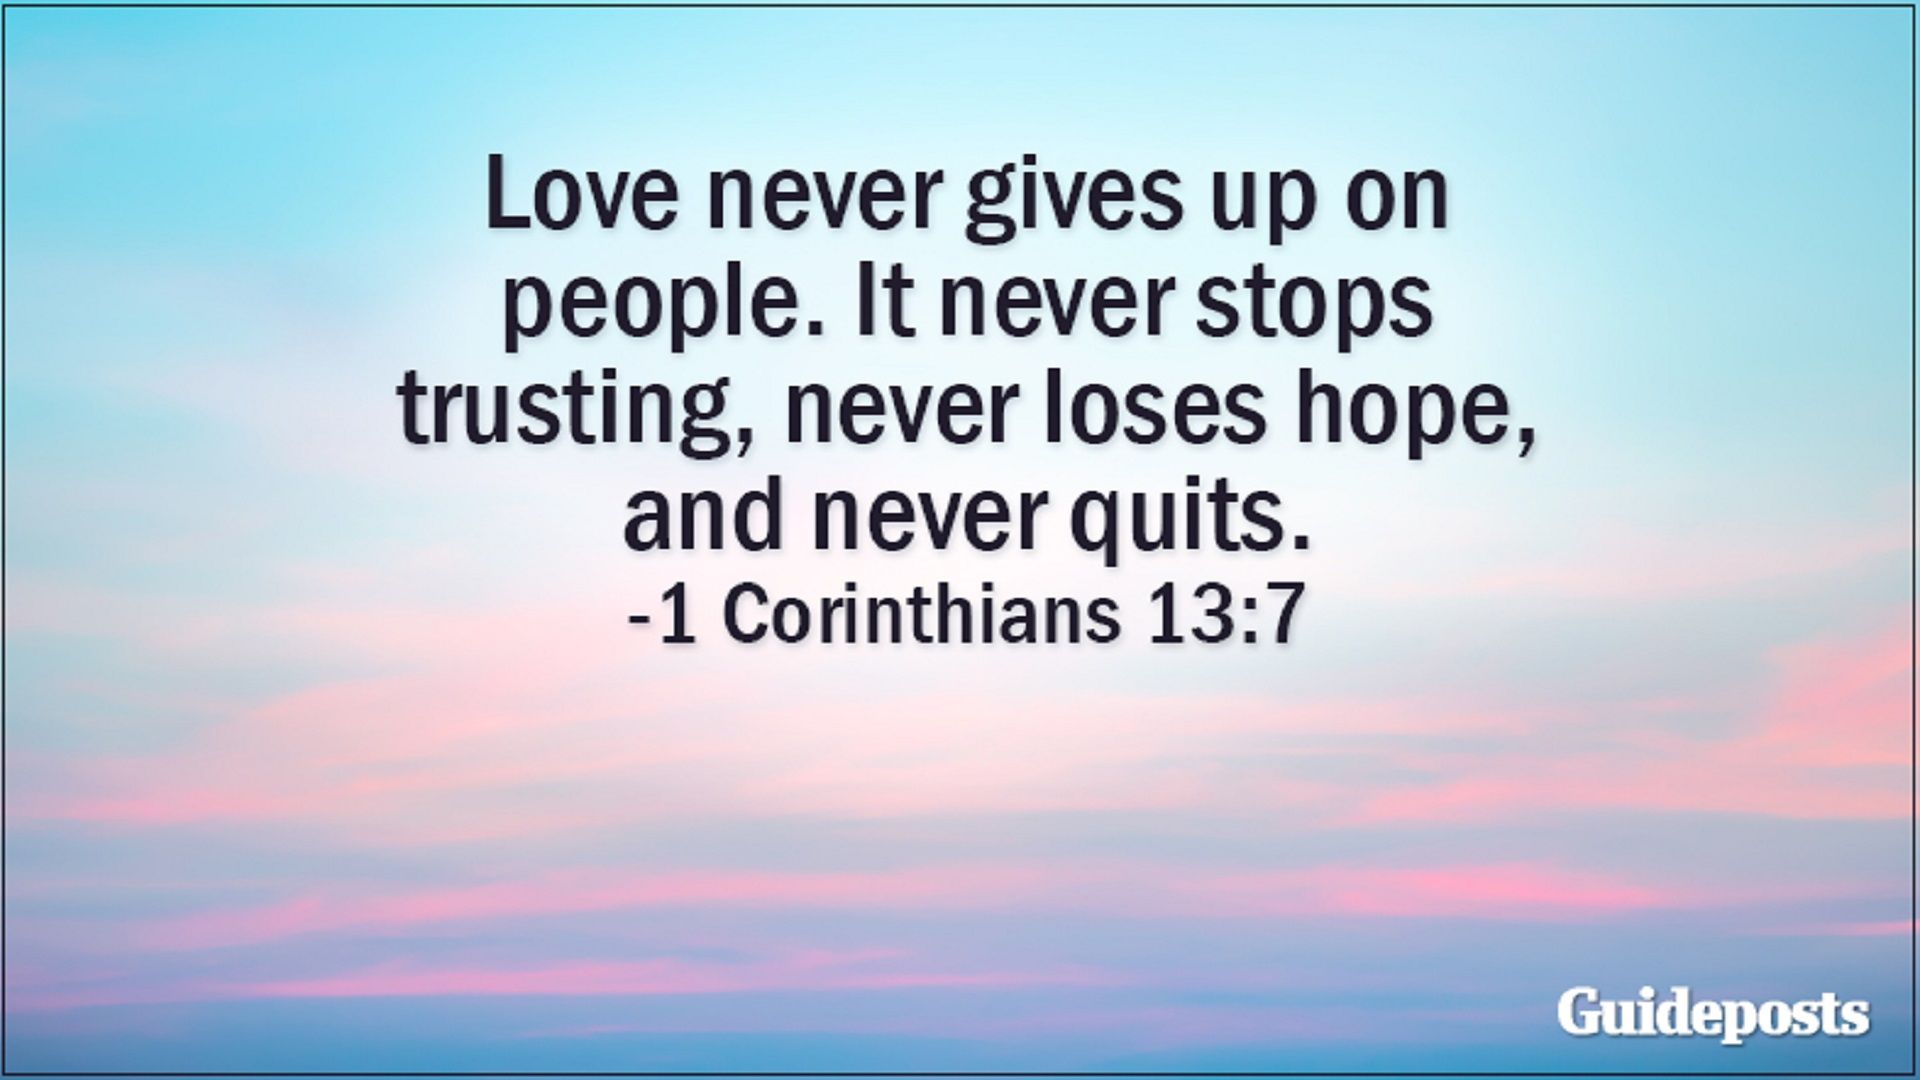 Love never gives up on people. It never stops trusting, never loses hope, and never quits. 1 Corinthians 13:7